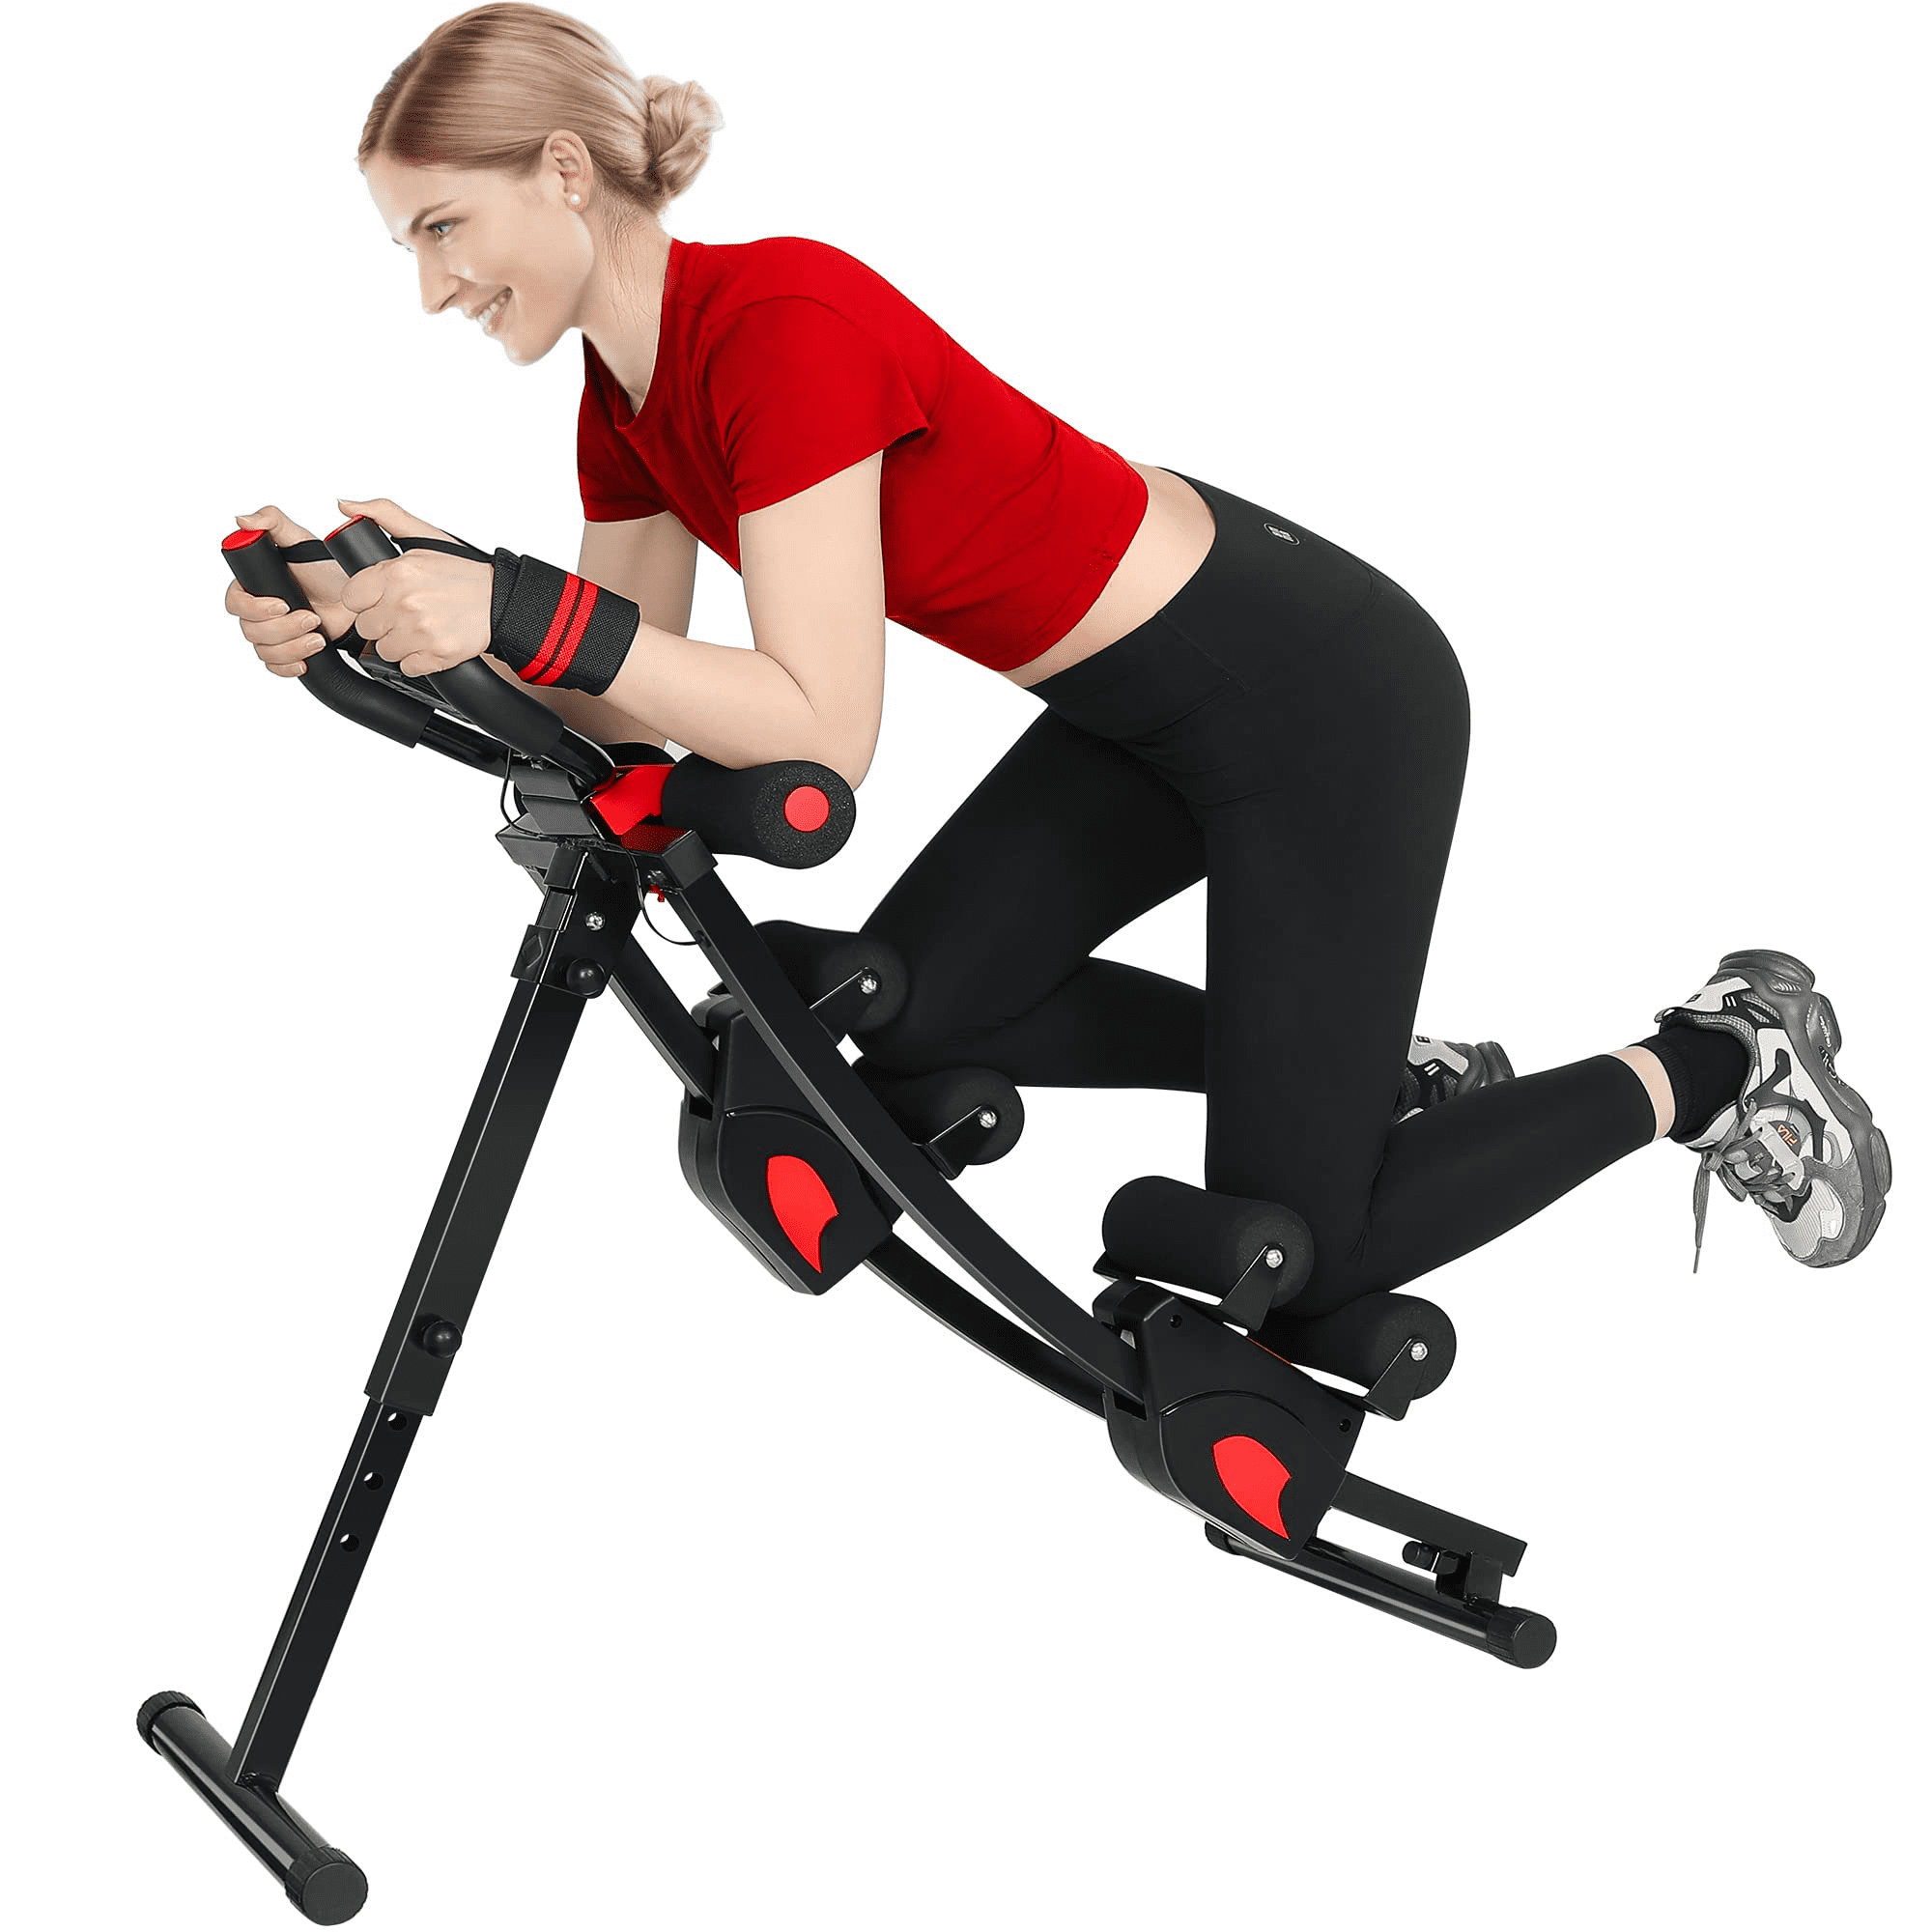 Abdominal Ab Workout Machine Crunch Exercise Equipment Home Gym Fitness Training 